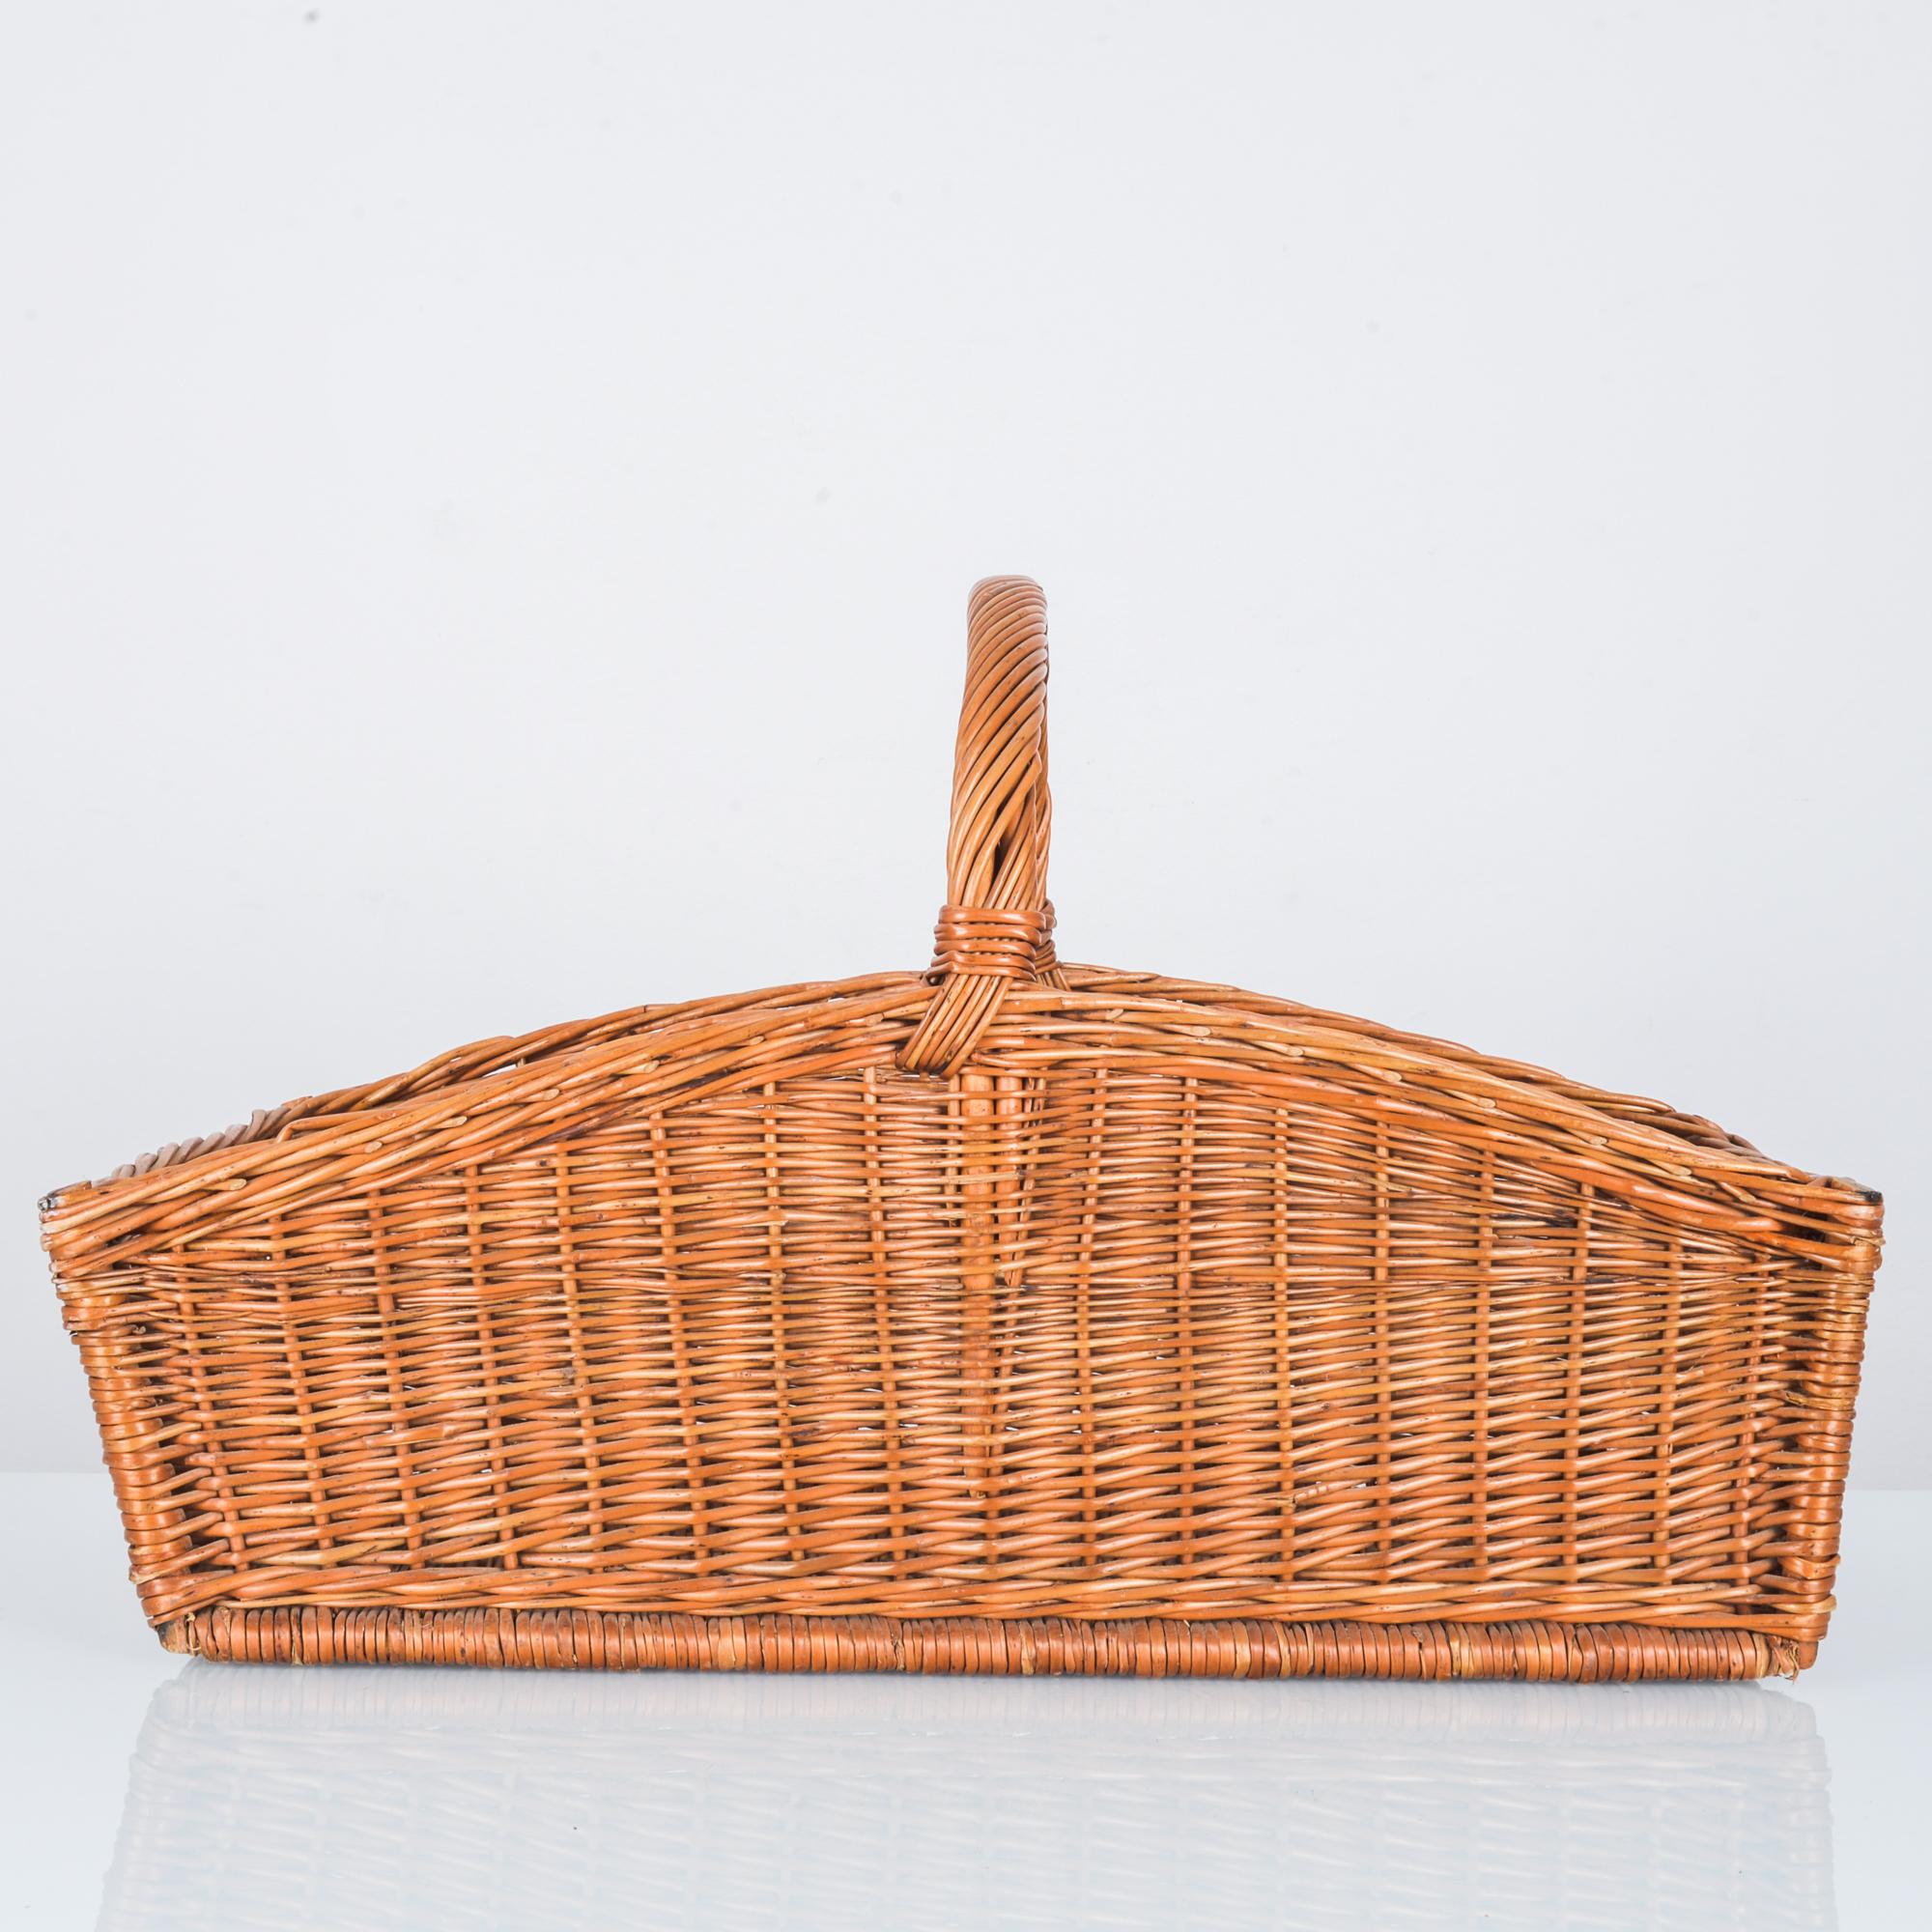 A wicker basket from France, circa 1940. A cheerful rustic piece-- ample yet light, the shape is crowned by a broad arch. The woven wicker has a bright, coppery tone. A handle of twisted wicker allows the basket to be carried over the elbow for